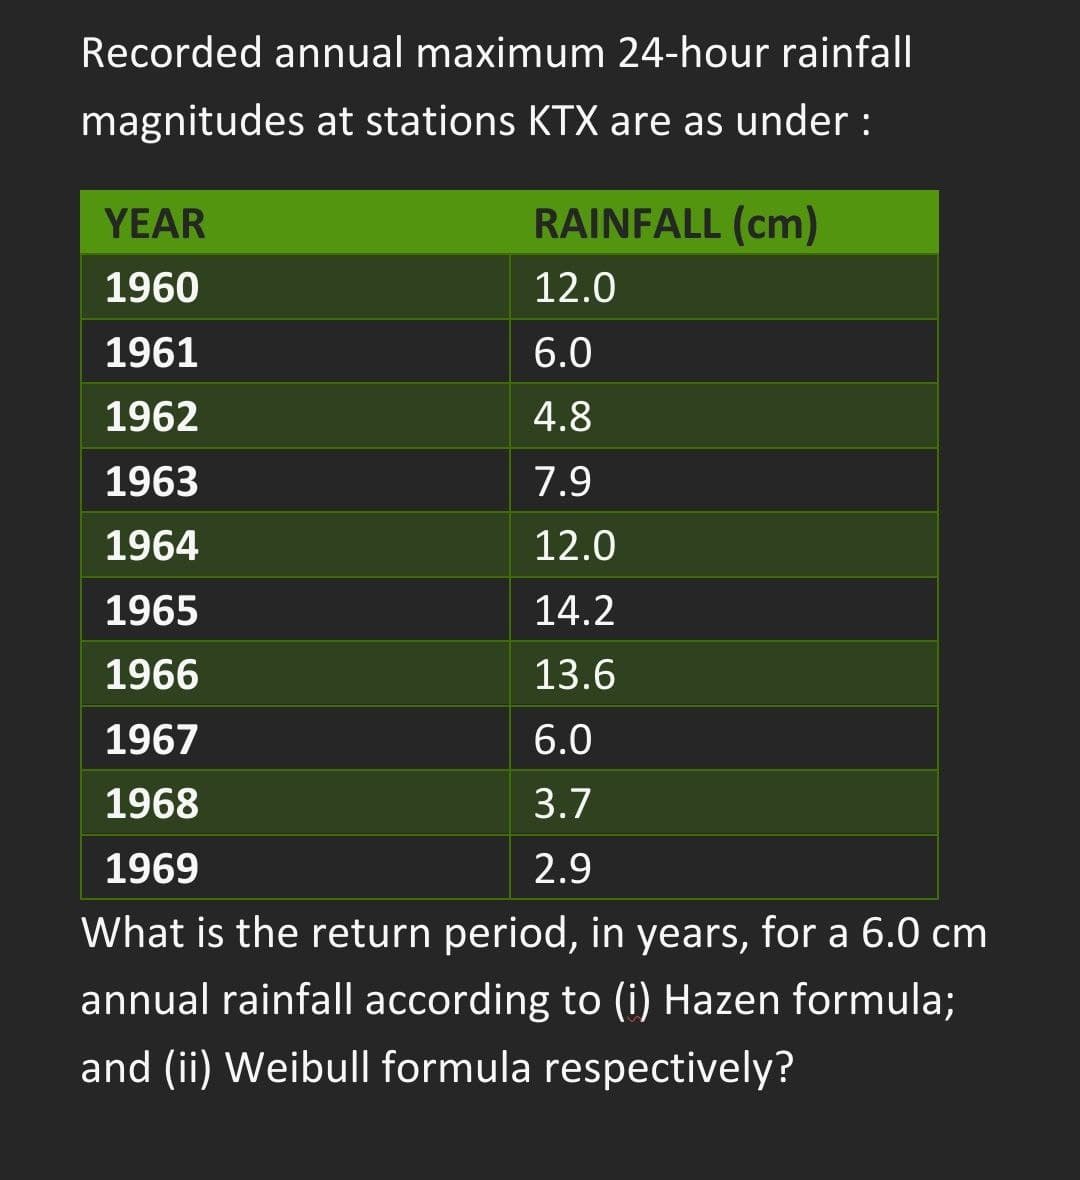 Recorded annual maximum 24-hour rainfall
magnitudes at stations KTX are as under :
YEAR
RAINFALL (cm)
1960
12.0
1961
6.0
1962
4.8
1963
7.9
1964
12.0
1965
14.2
1966
13.6
1967
6.0
1968
3.7
1969
2.9
What is the return period, in years, for a 6.0 cm
annual rainfall according to (i) Hazen formula;
and (ii) Weibull formula respectively?
